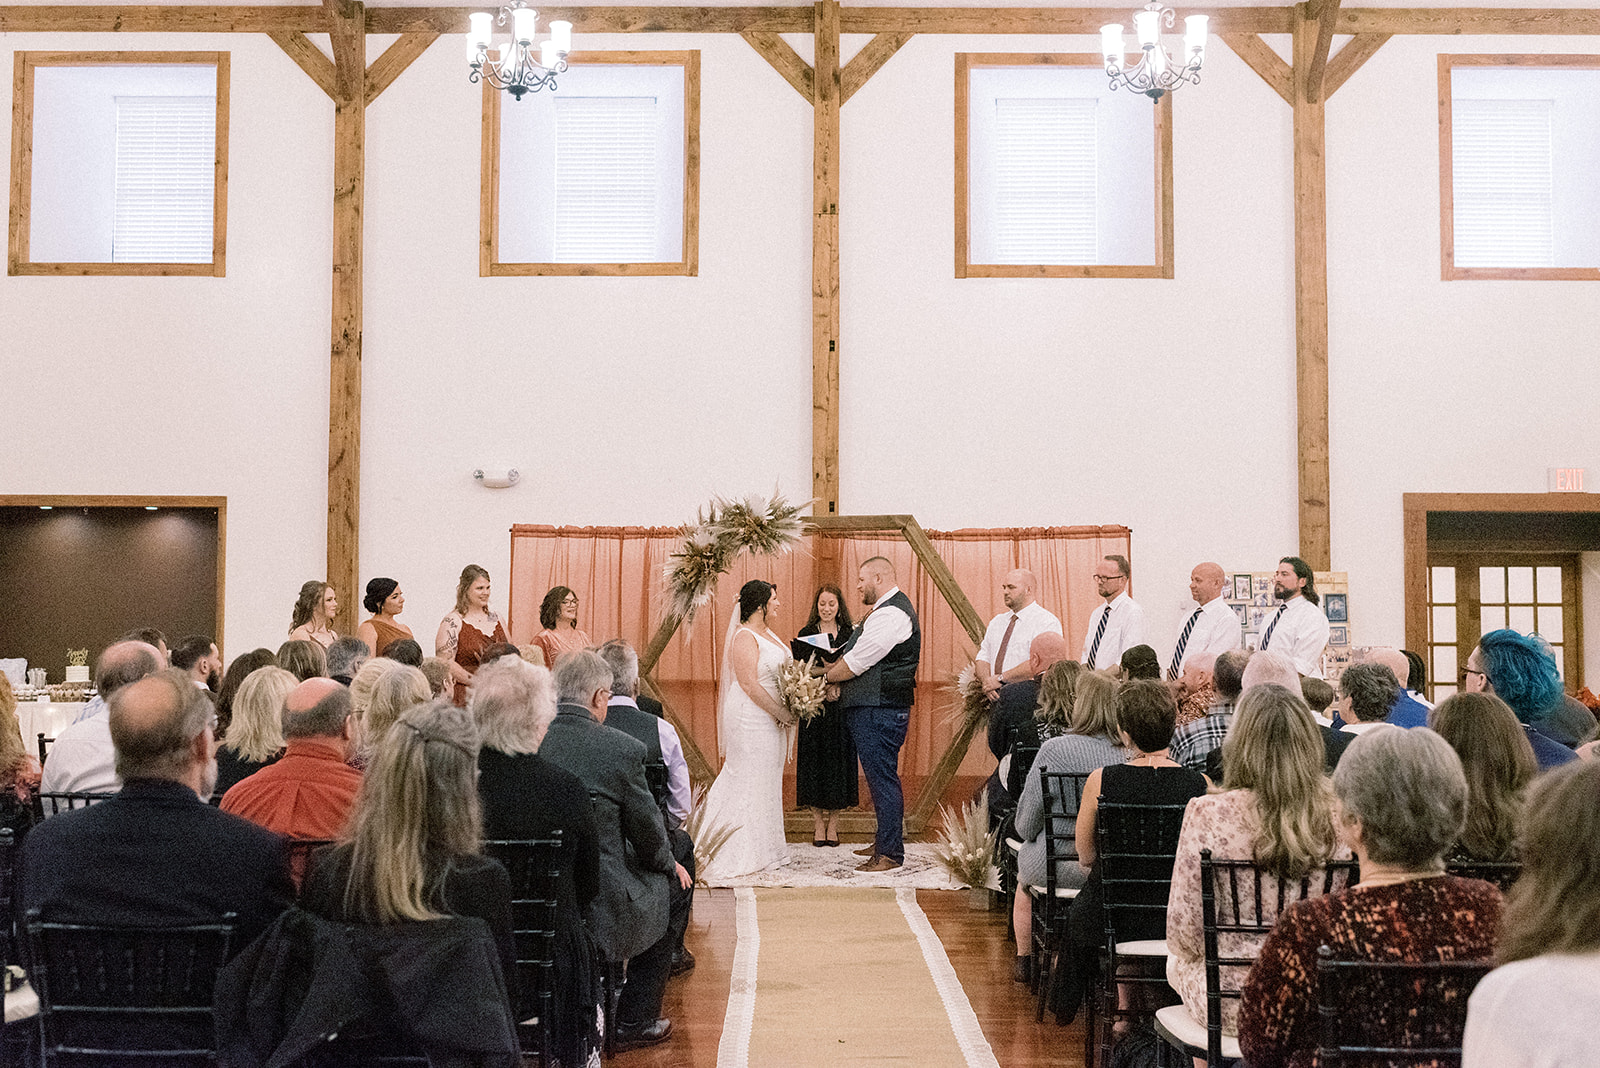 Pennsylvania wedding photographer captures bride and groom holding hands at wedding ceremony